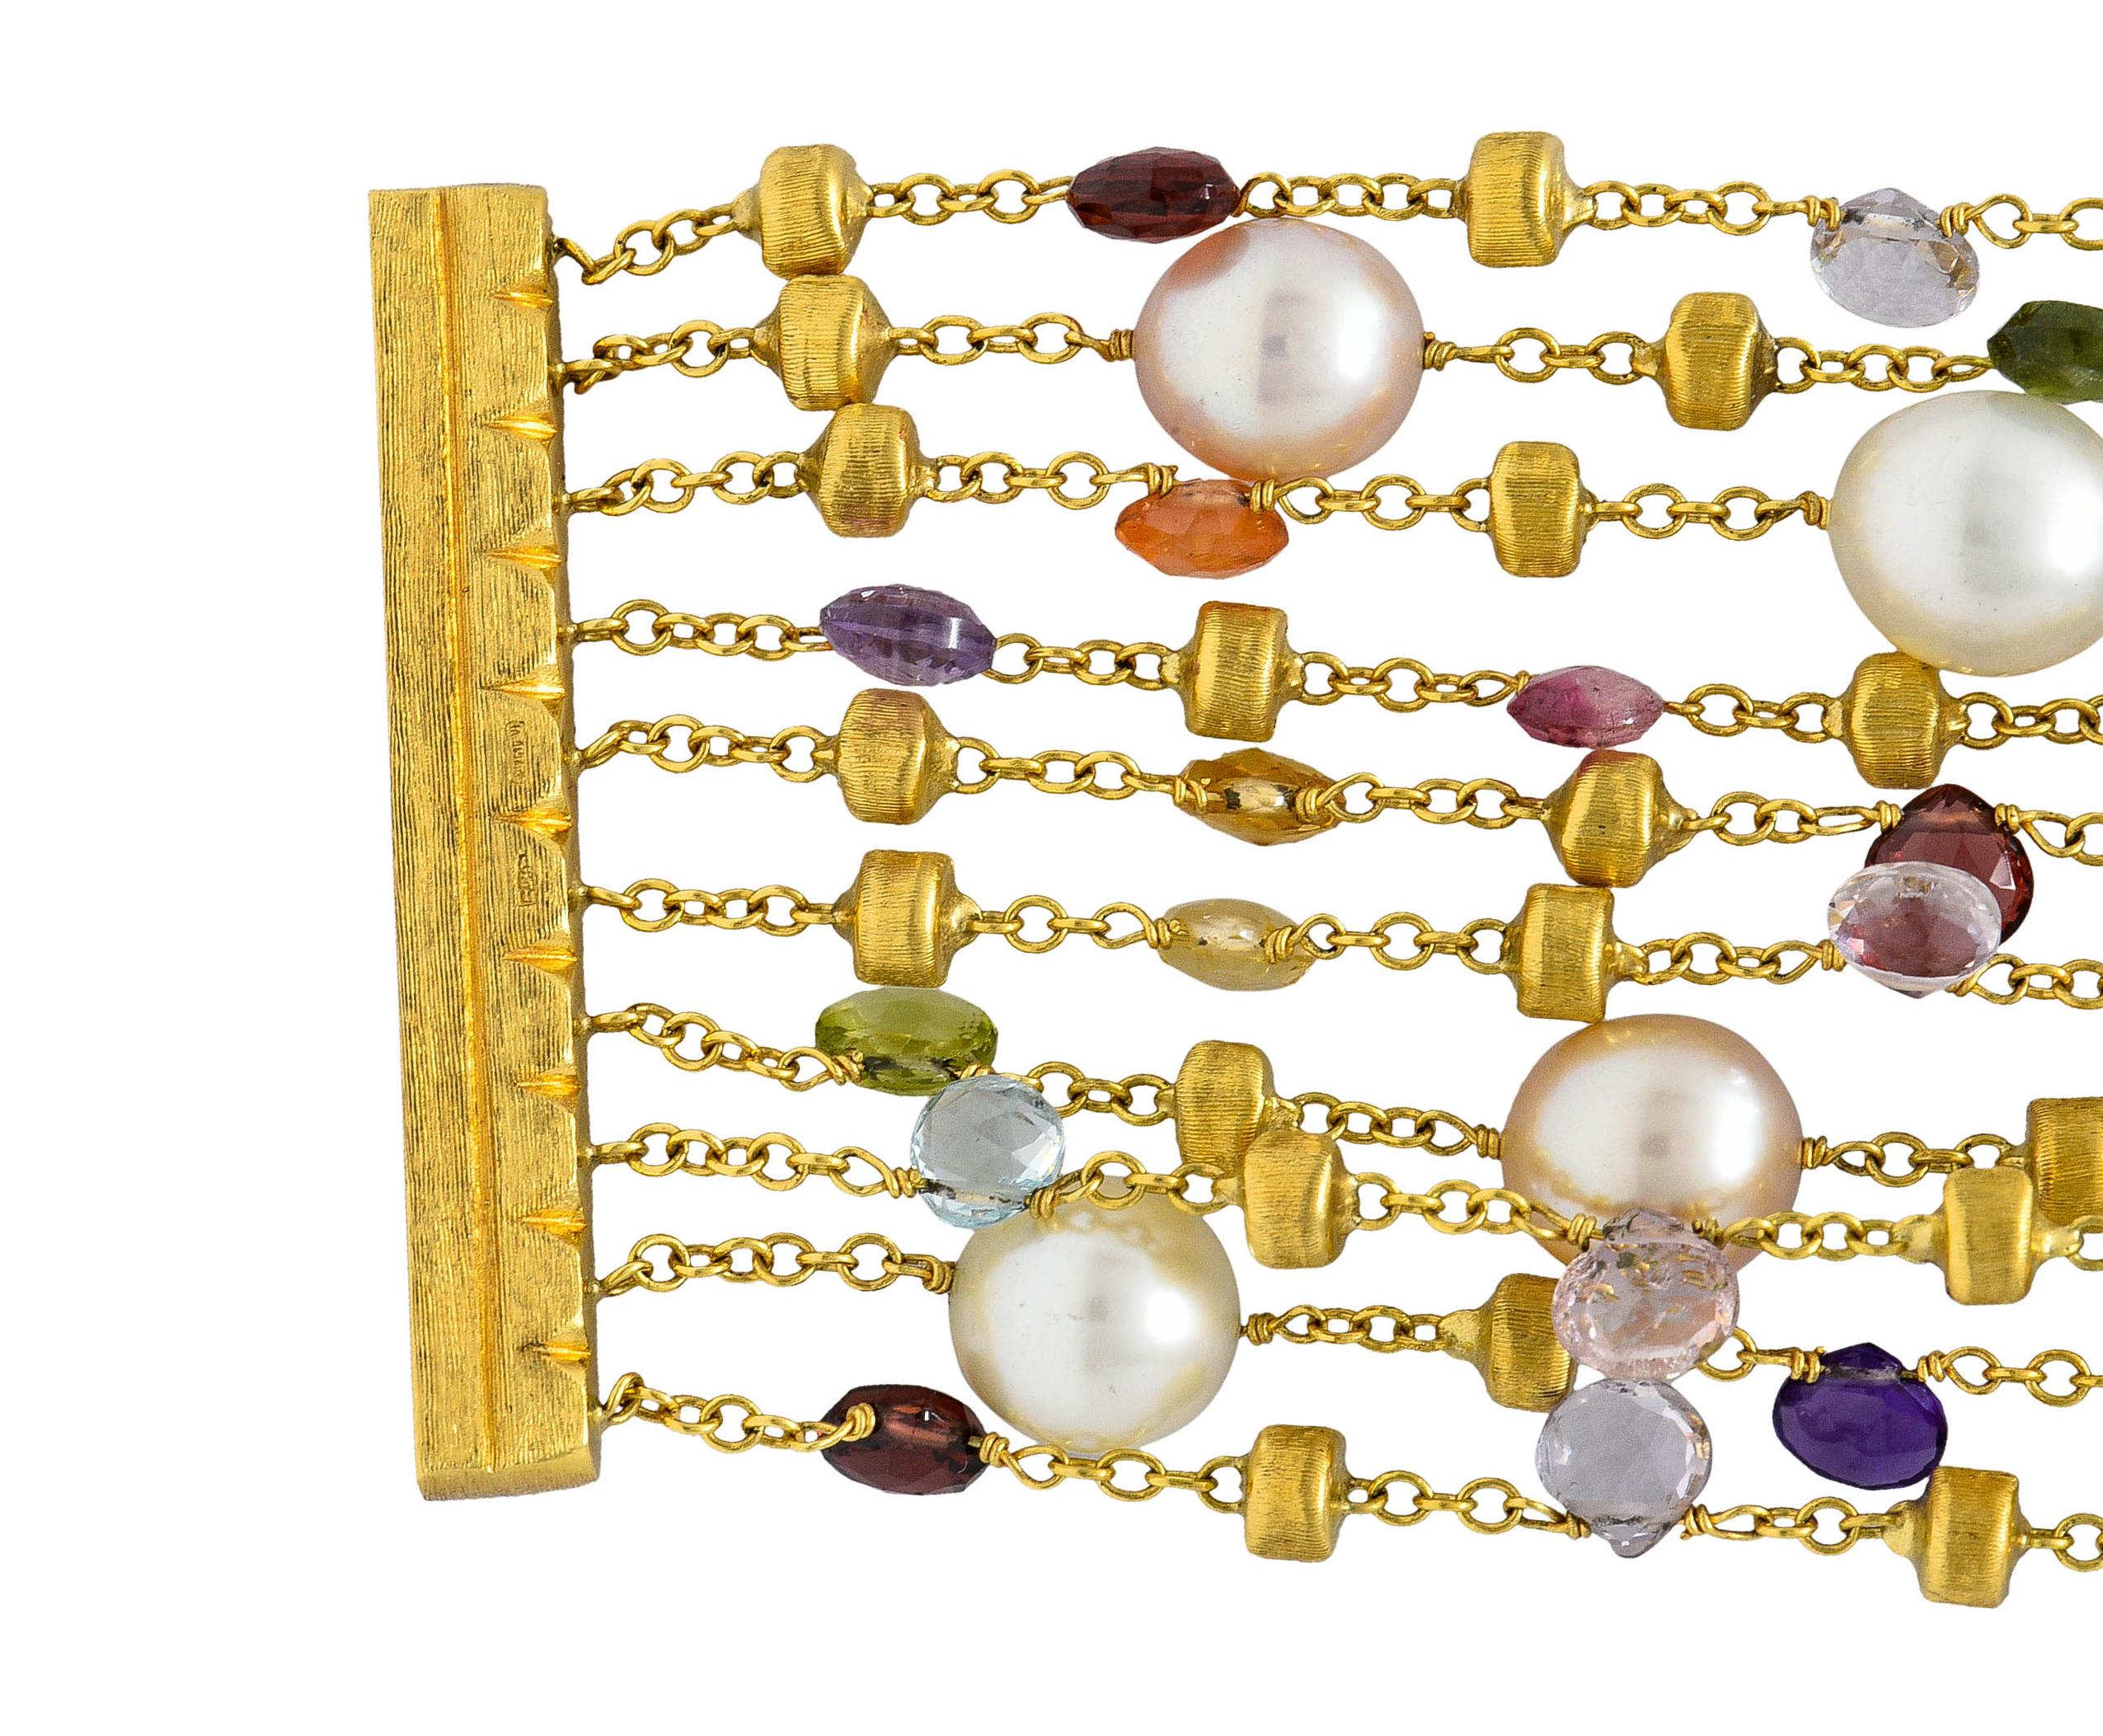 Bracelet is designed as a ten strand bracelet decorated with pearls, faceted gemstones, and brushed gold rondelle stations

Oval cultured pearls are white and cream in body color with some exhibiting rosè overtones - very good to excellent